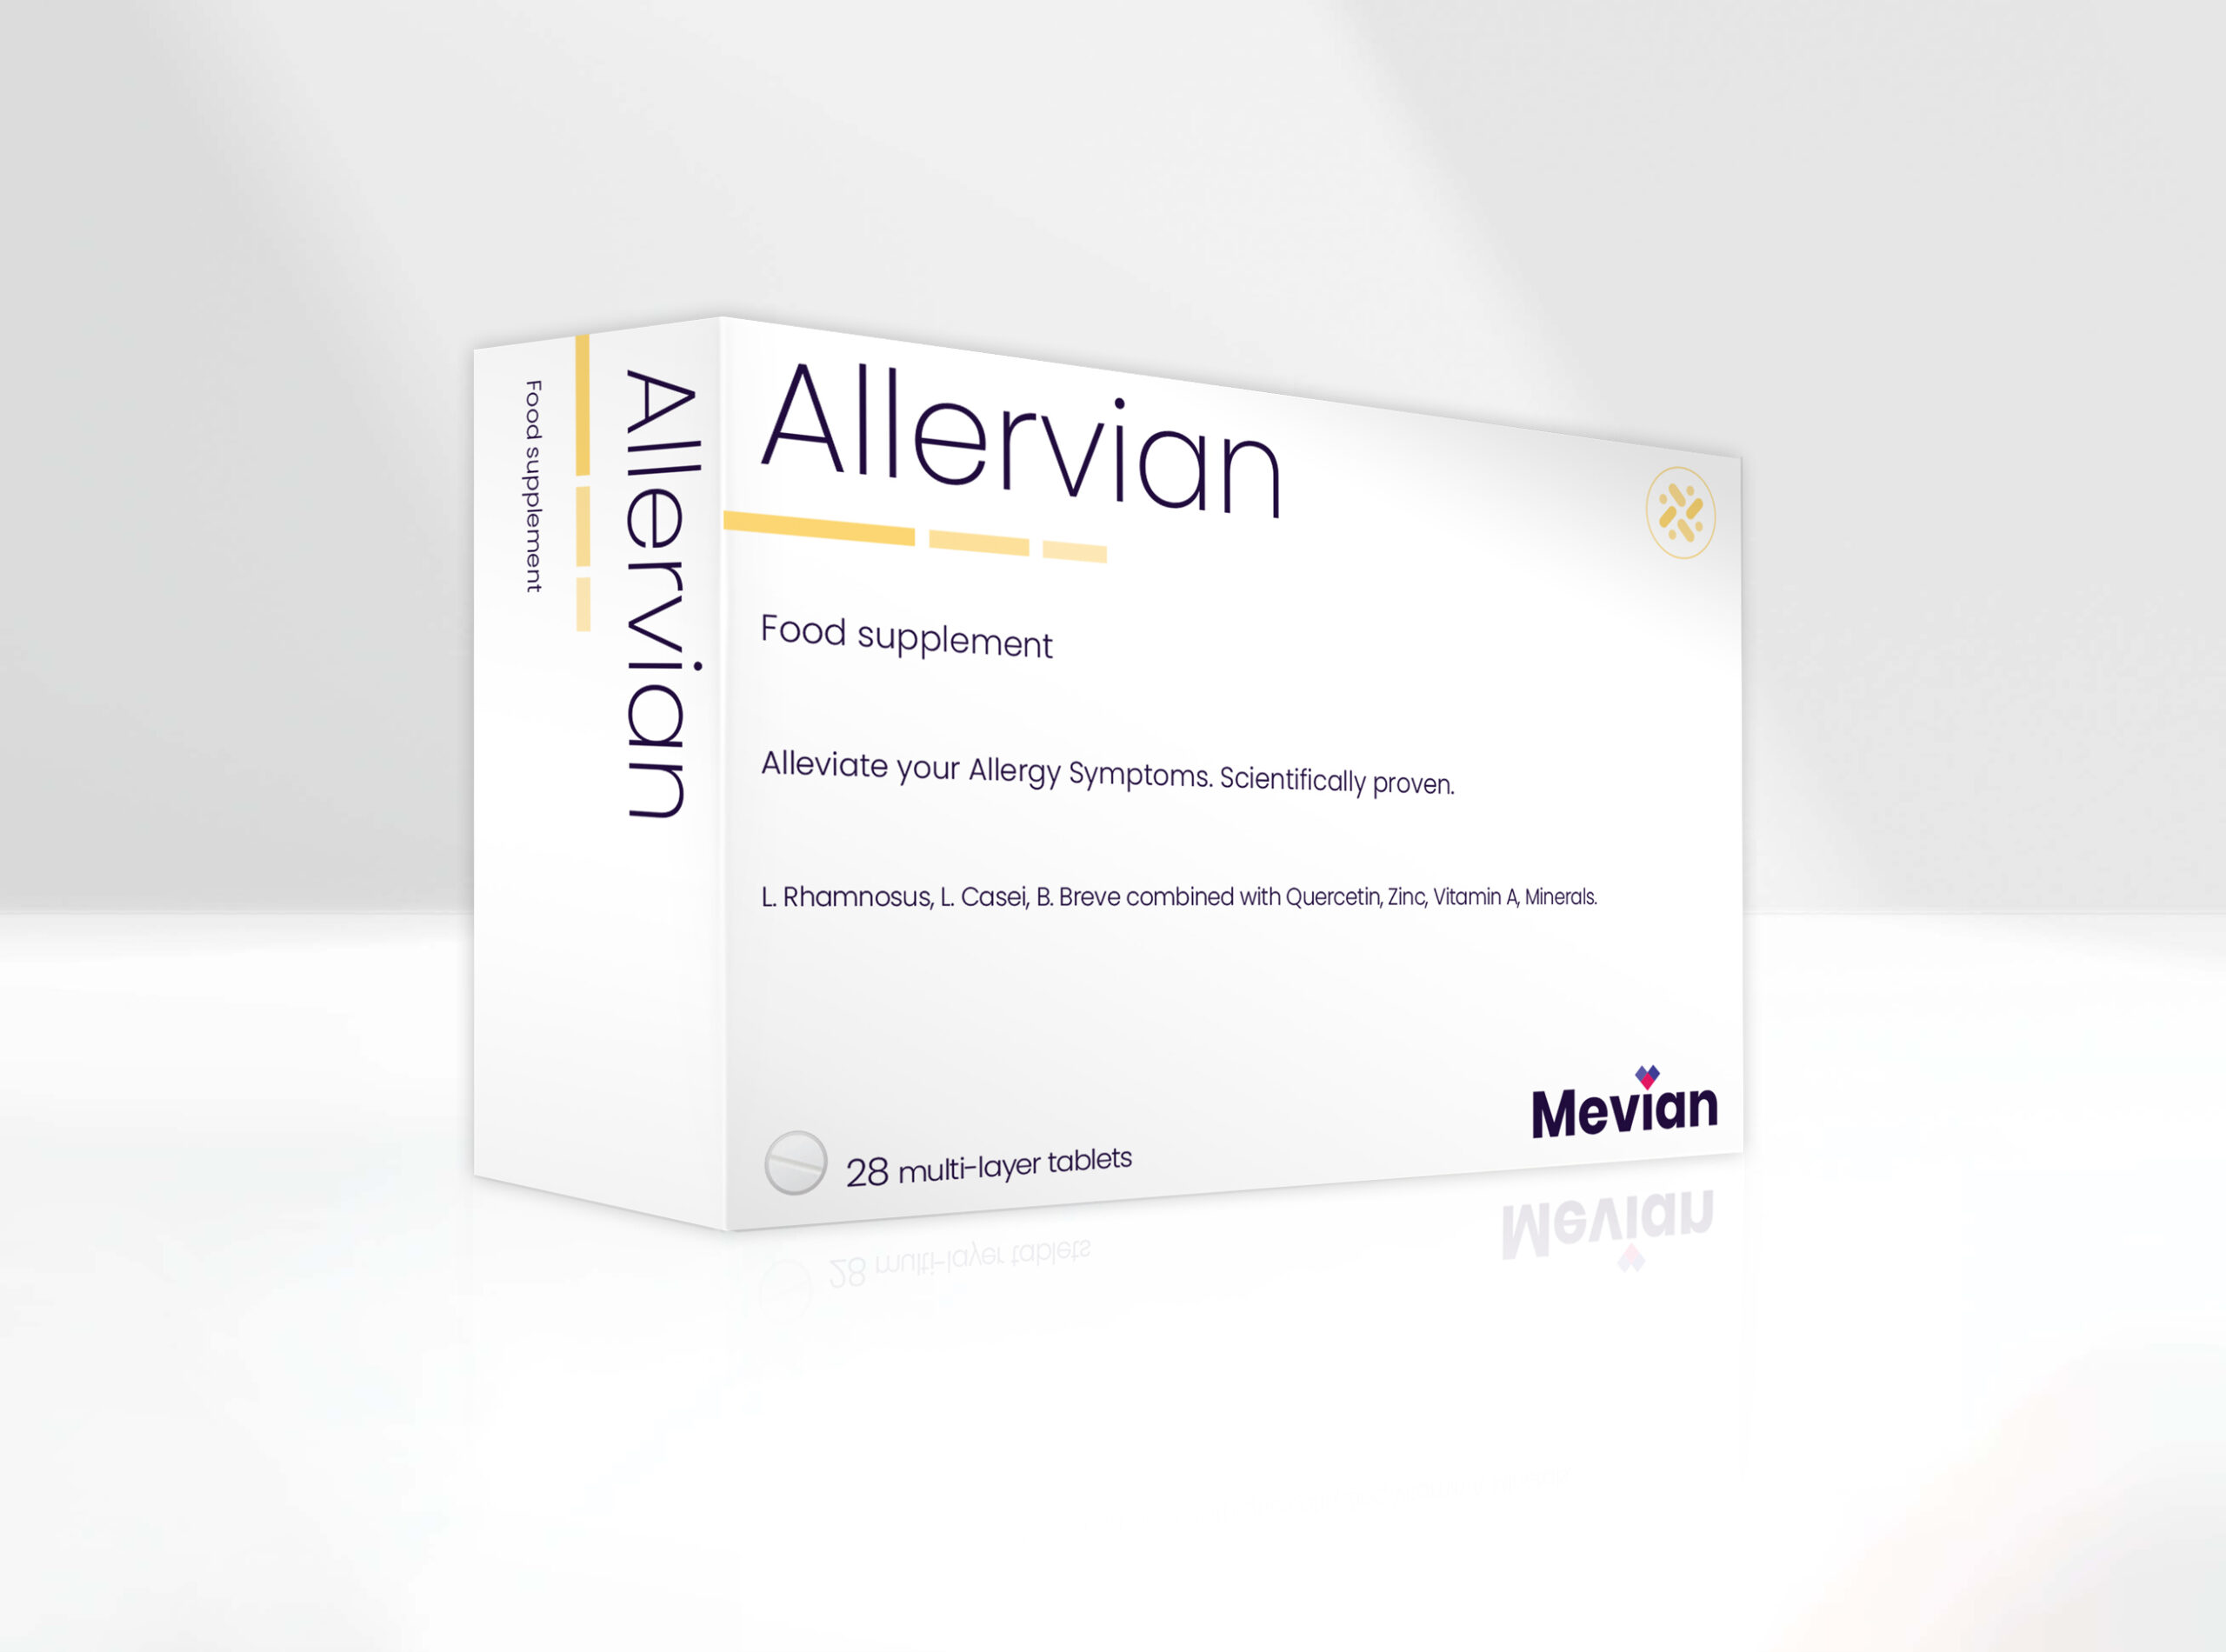 Allervian is a niche-formulated probiotics product of a multilayer tablet for supporting allergy symptom relief.